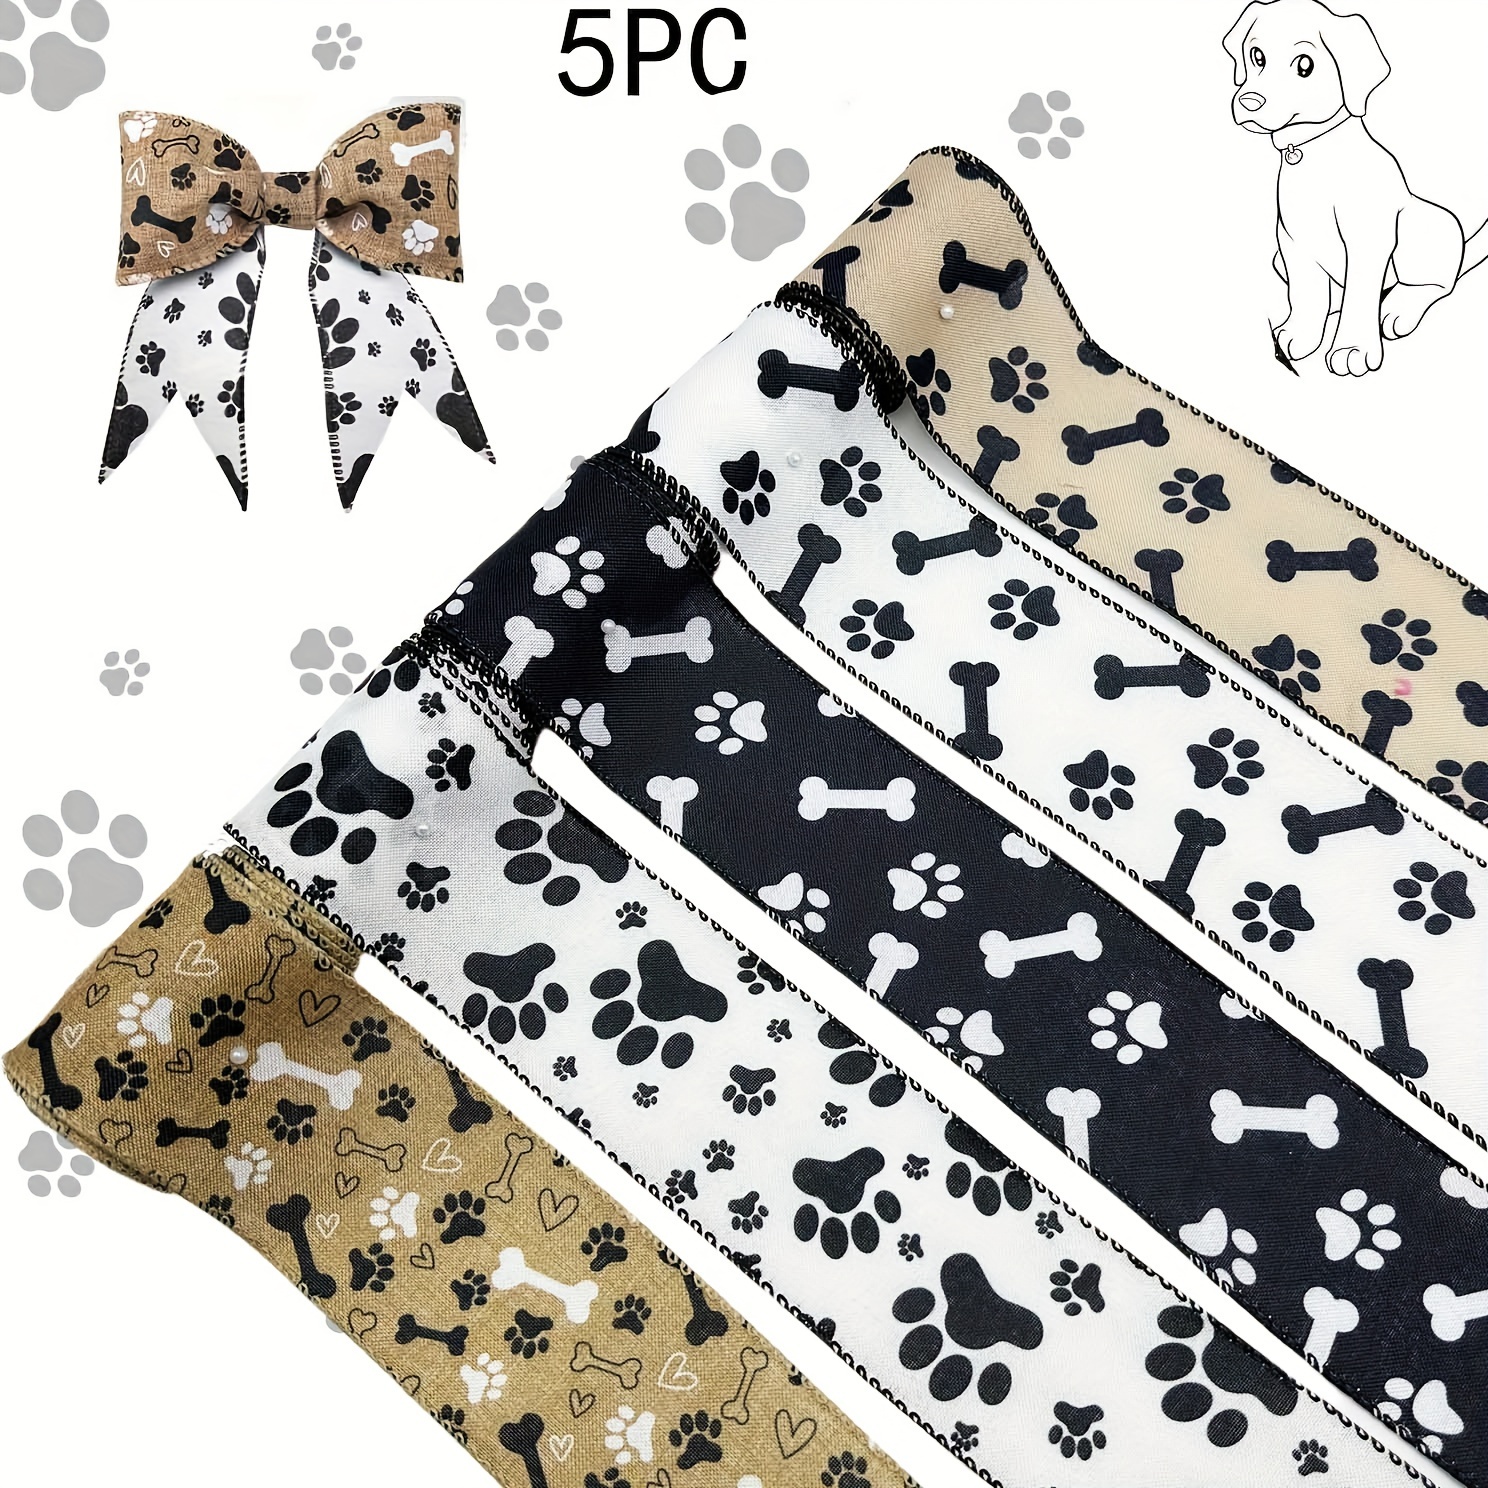 

5 Rolls, Dog Ribbon Paw Print Ribbon Wired Edge Ribbon 2.5 Inch Burlap Wired Ribbons For Crafts Party Home Ornaments Wedding Gift Diy Decoration Wrapping Bow Making Wreath Decor